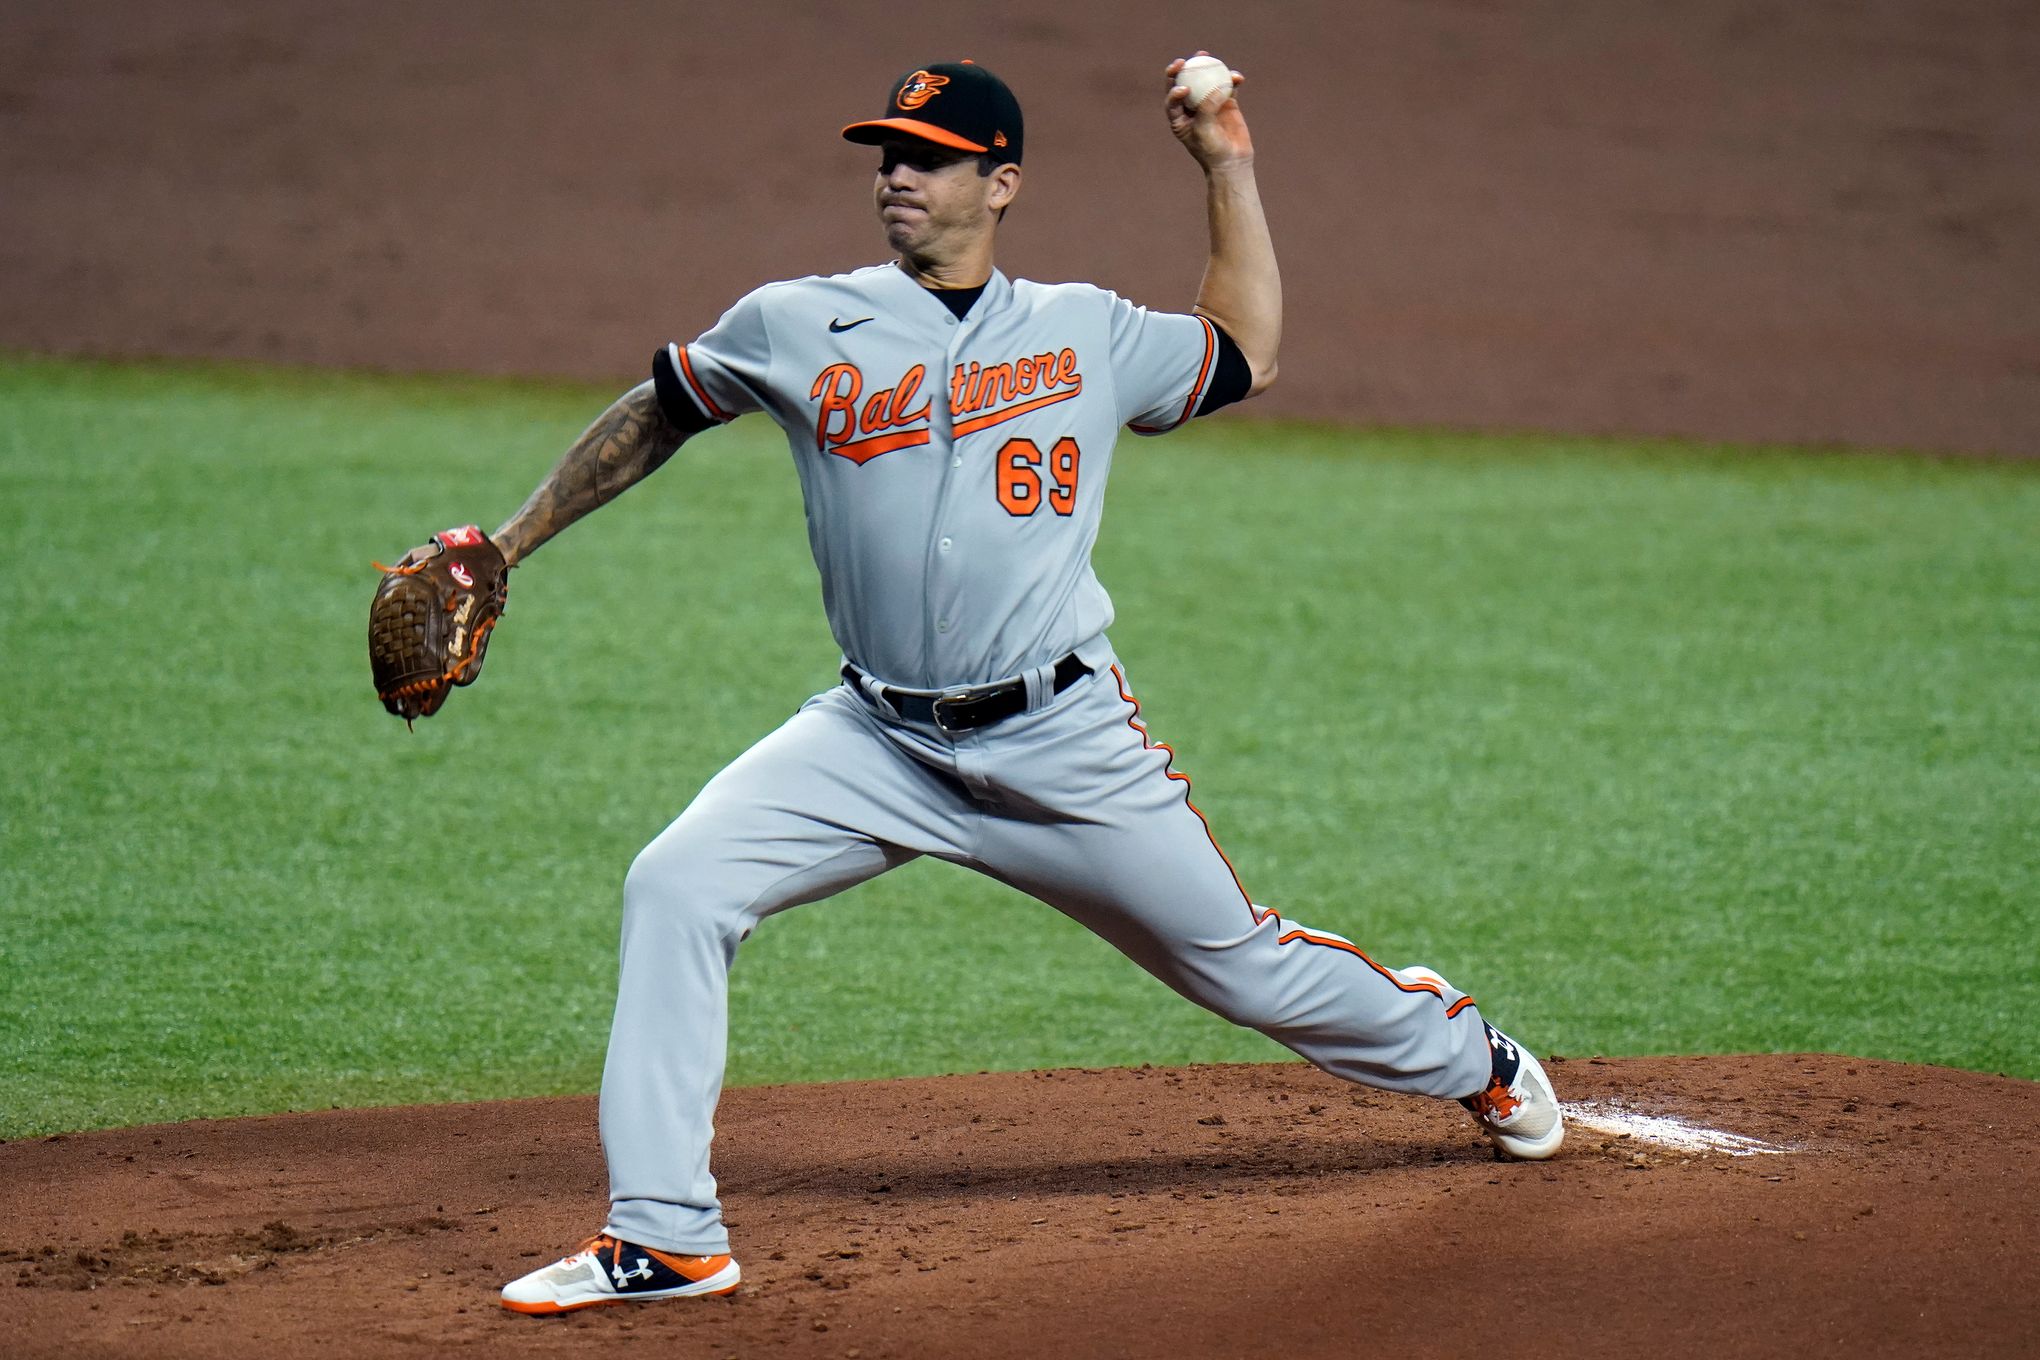 Baltimore Orioles Photography: Wednesday, August 10, 2011 vs